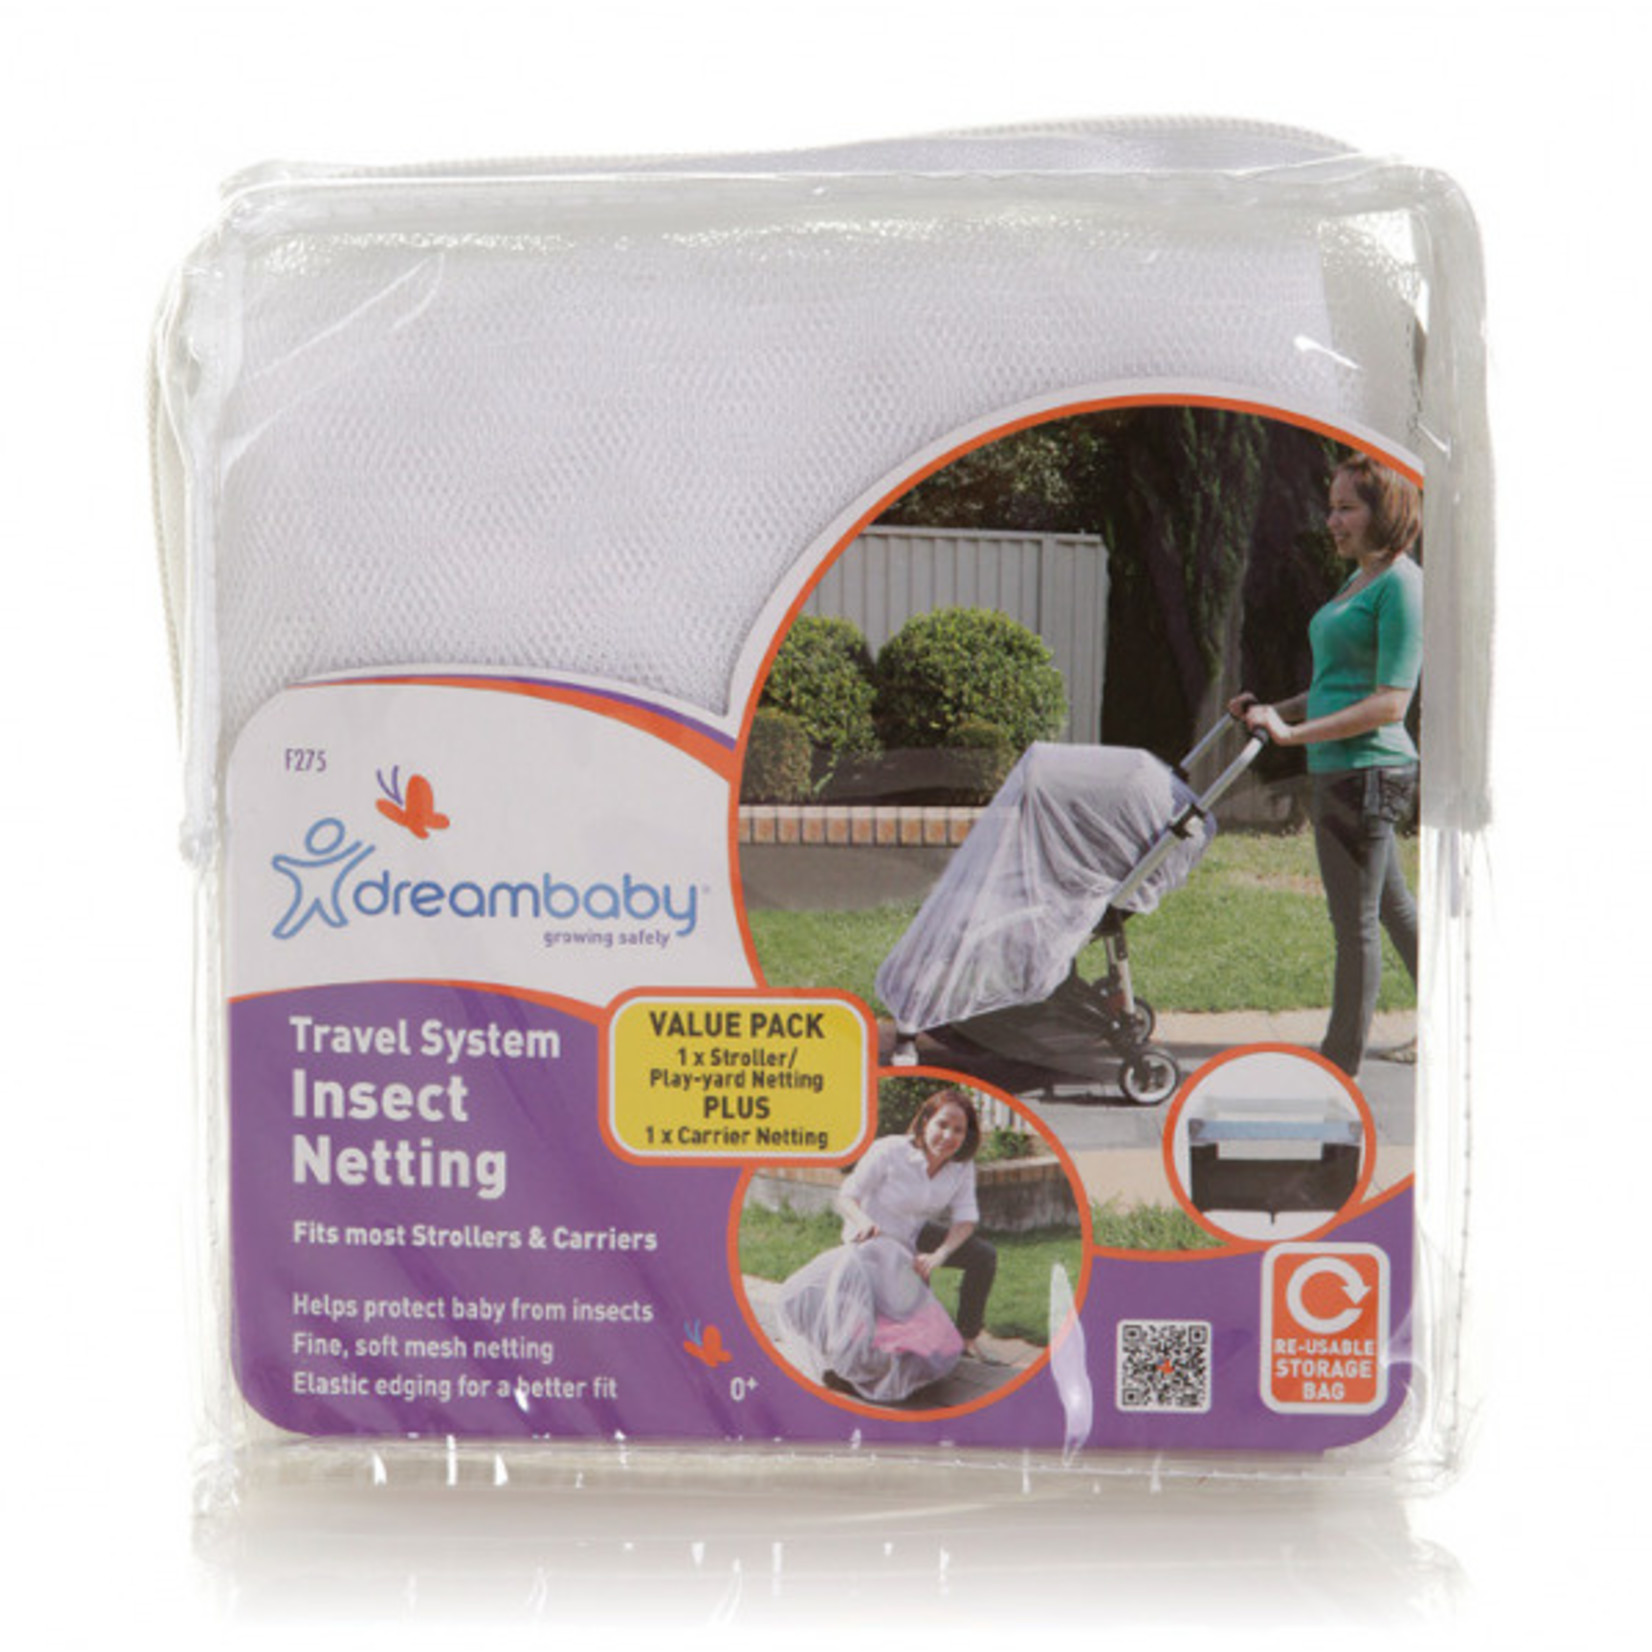 Dreambaby STROLLER & PLAY-YARD INSECT NETTING